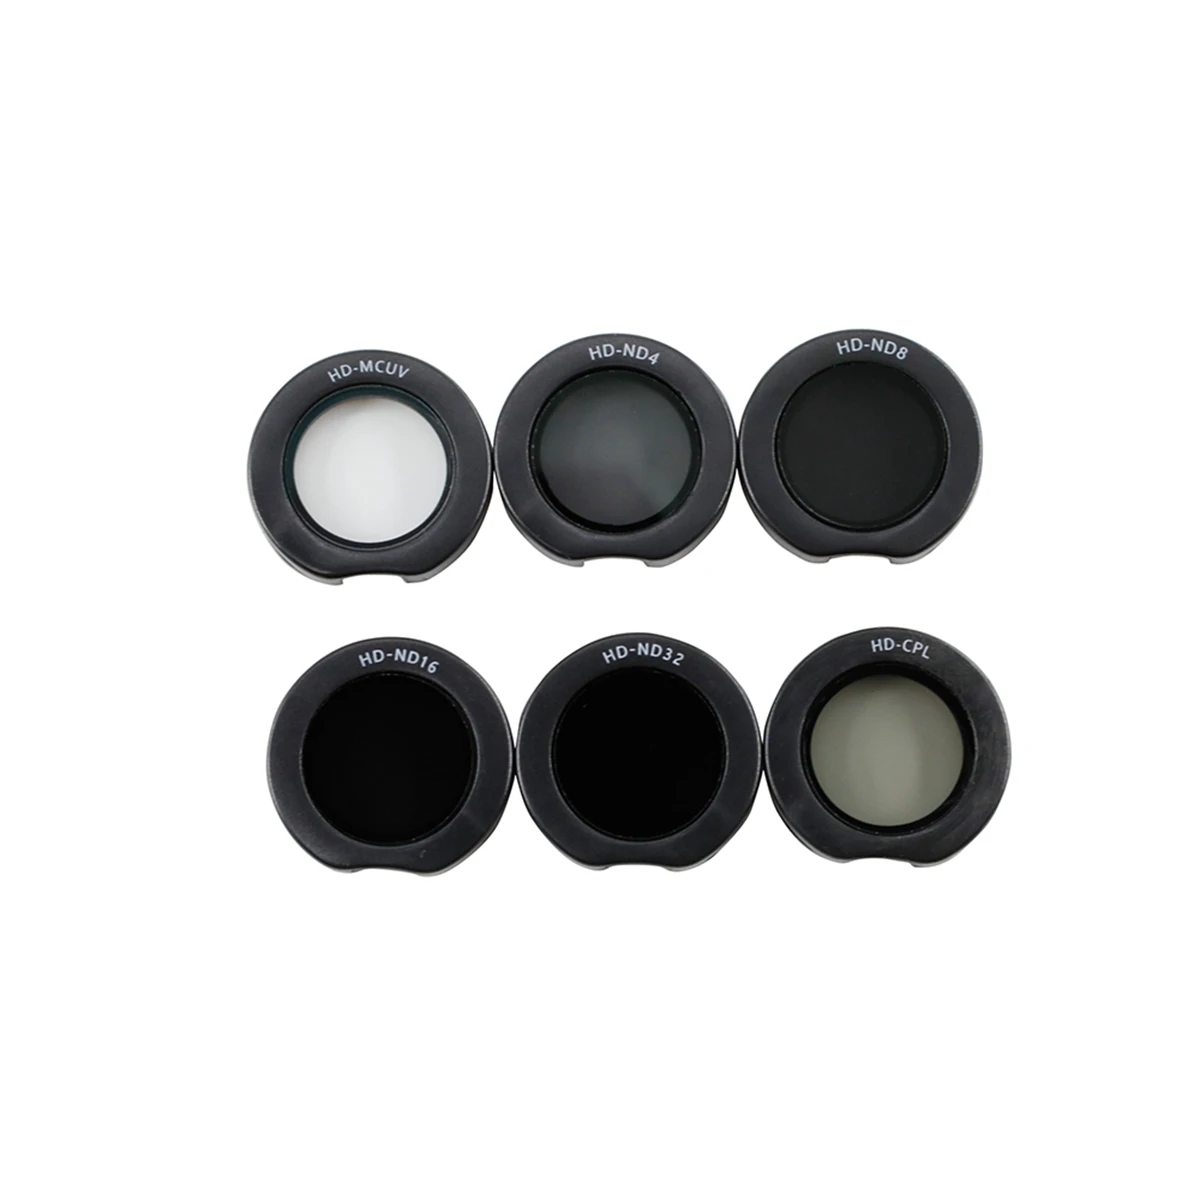 

Parrot Anafi Lens Filter Bundle ND CPL UV ND32 ND16 ND8 Neutral Density Polarizing Filter for Parrot ANAFI Drone Spare Parts